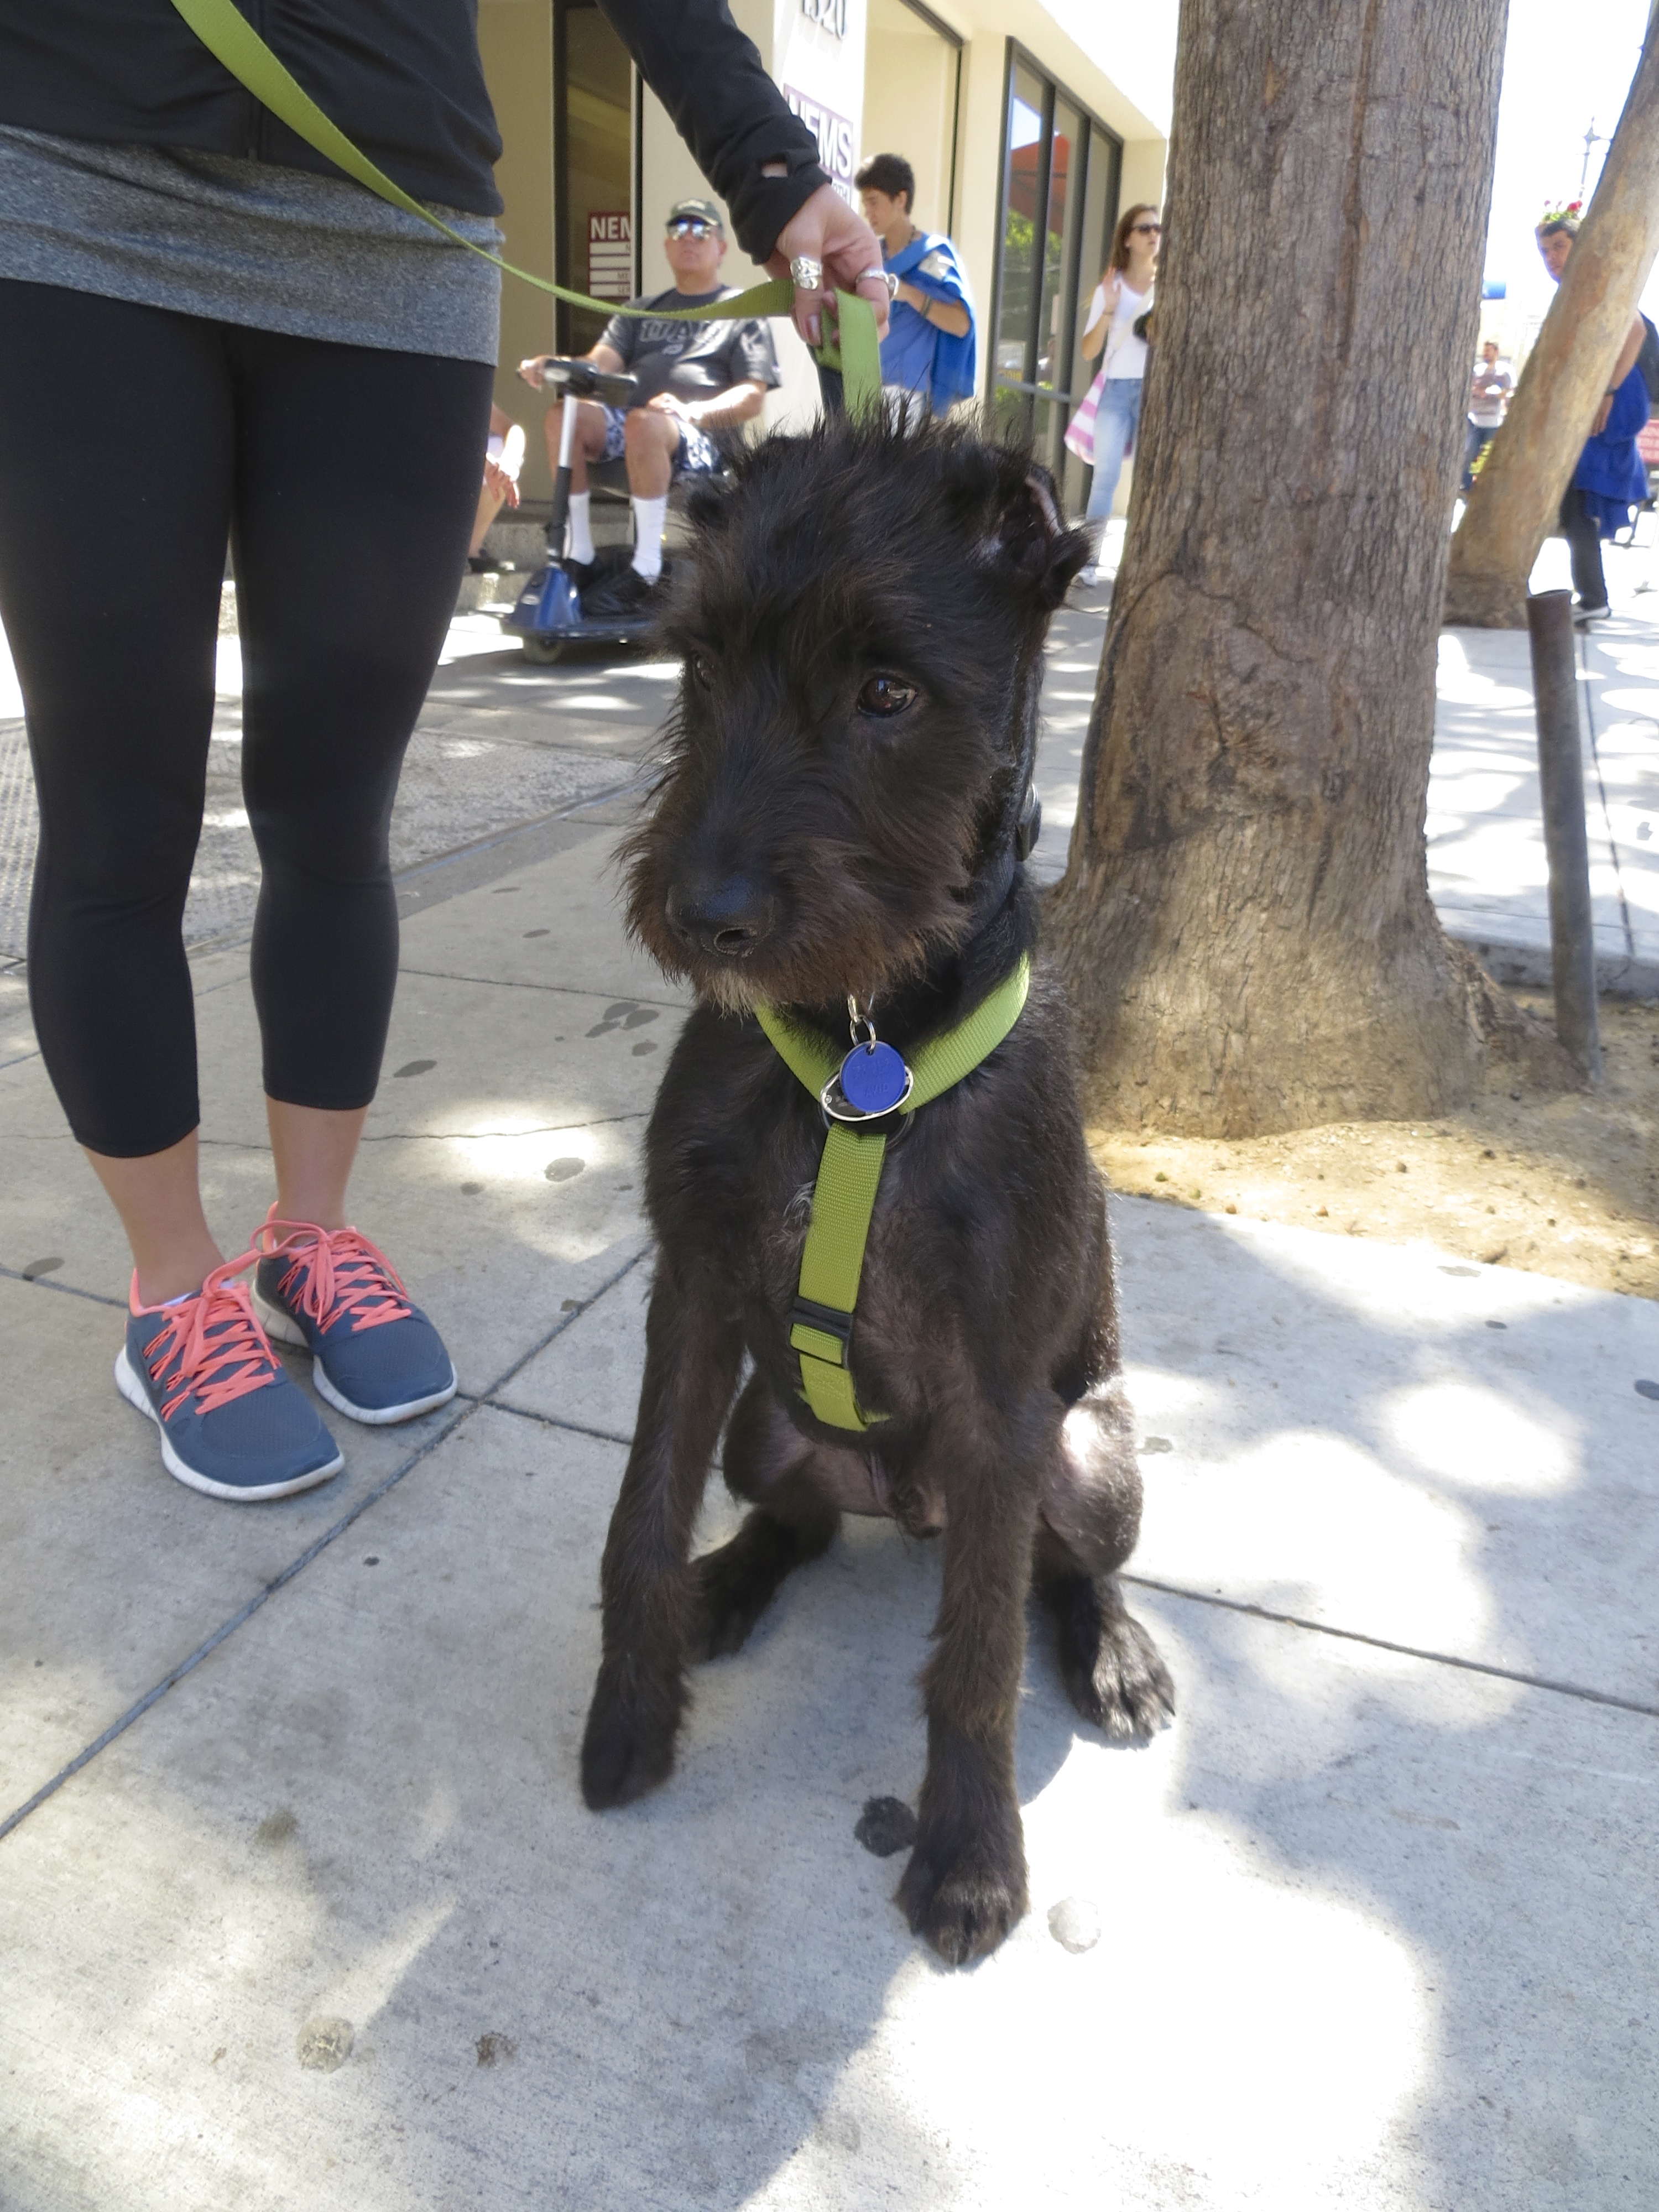 Giant Schnauzer Puppy with Badly Cropped Ears